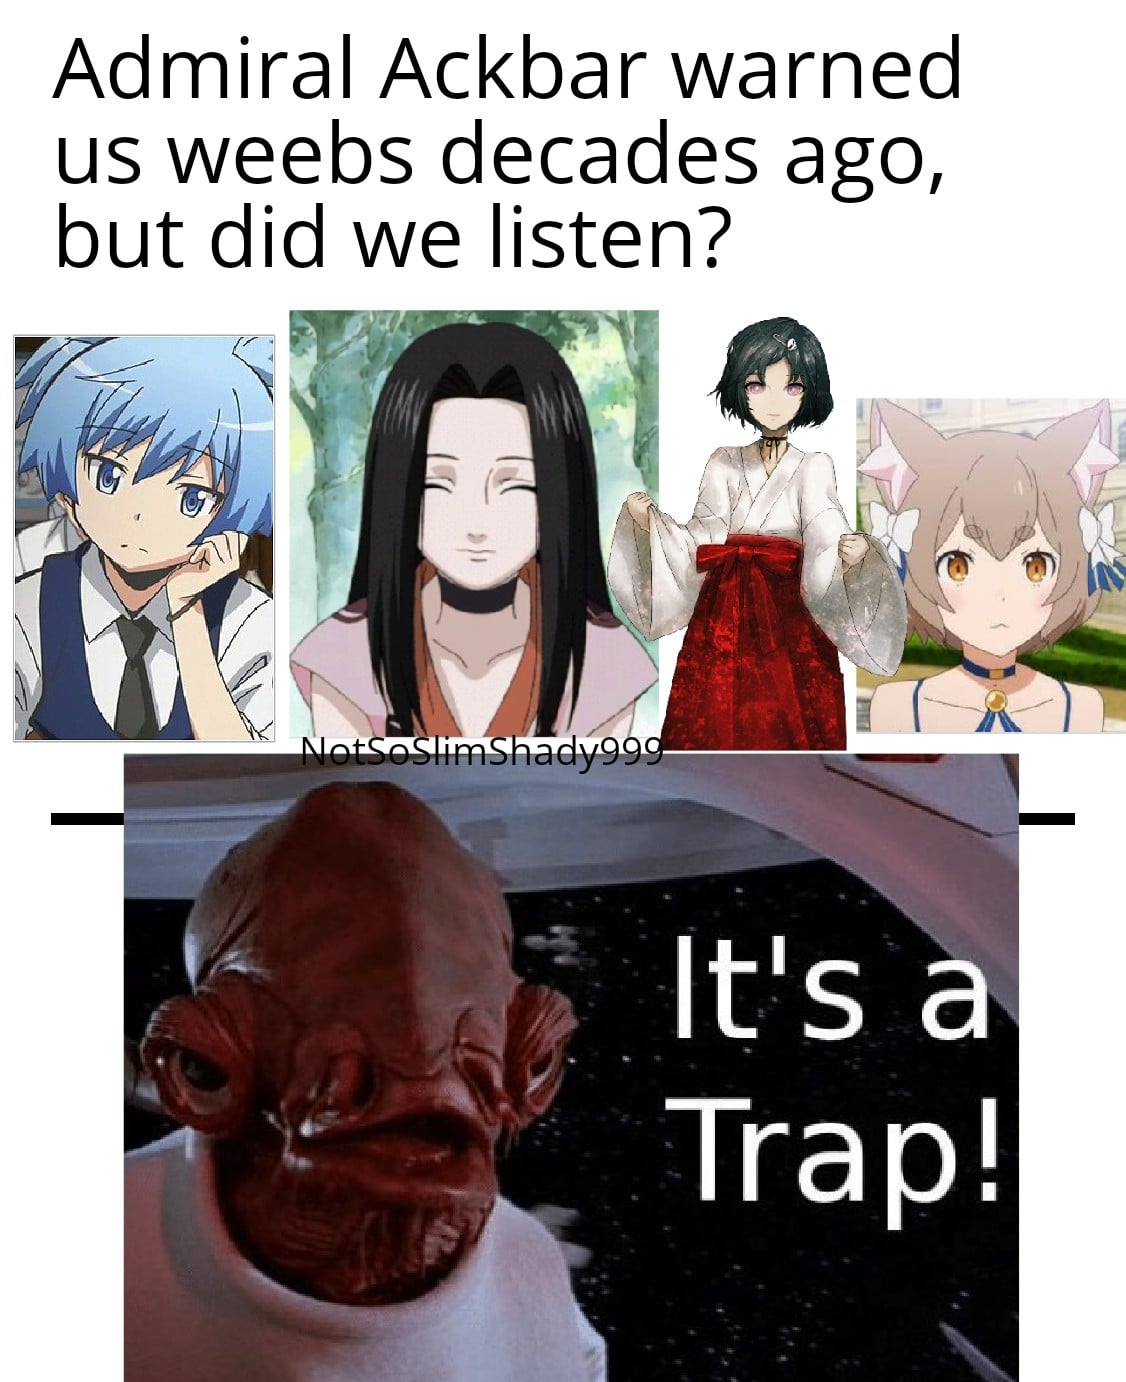 anime anime-memes anime text: Admiral Ackbar warned us weebs decades ago, but did we listen? ltls a Trap! 